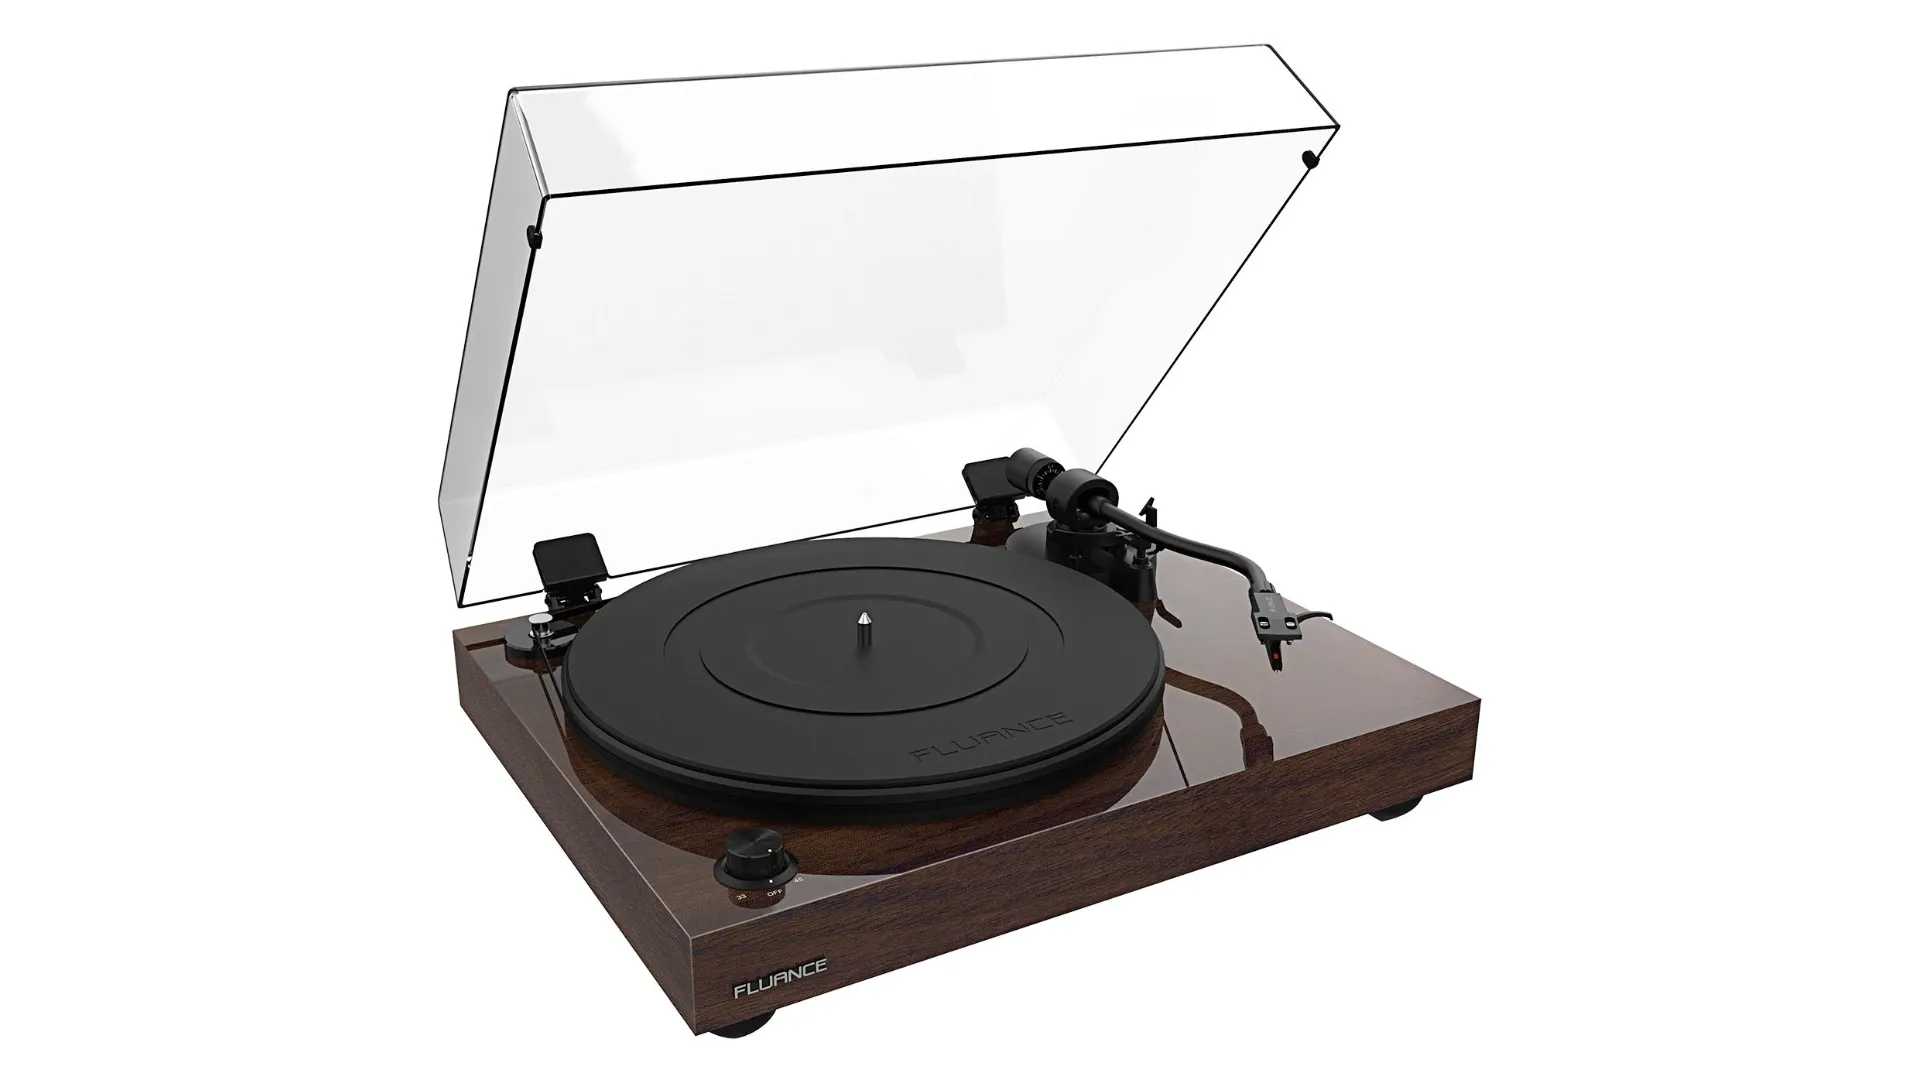 Fluance RT82 Reference turntable